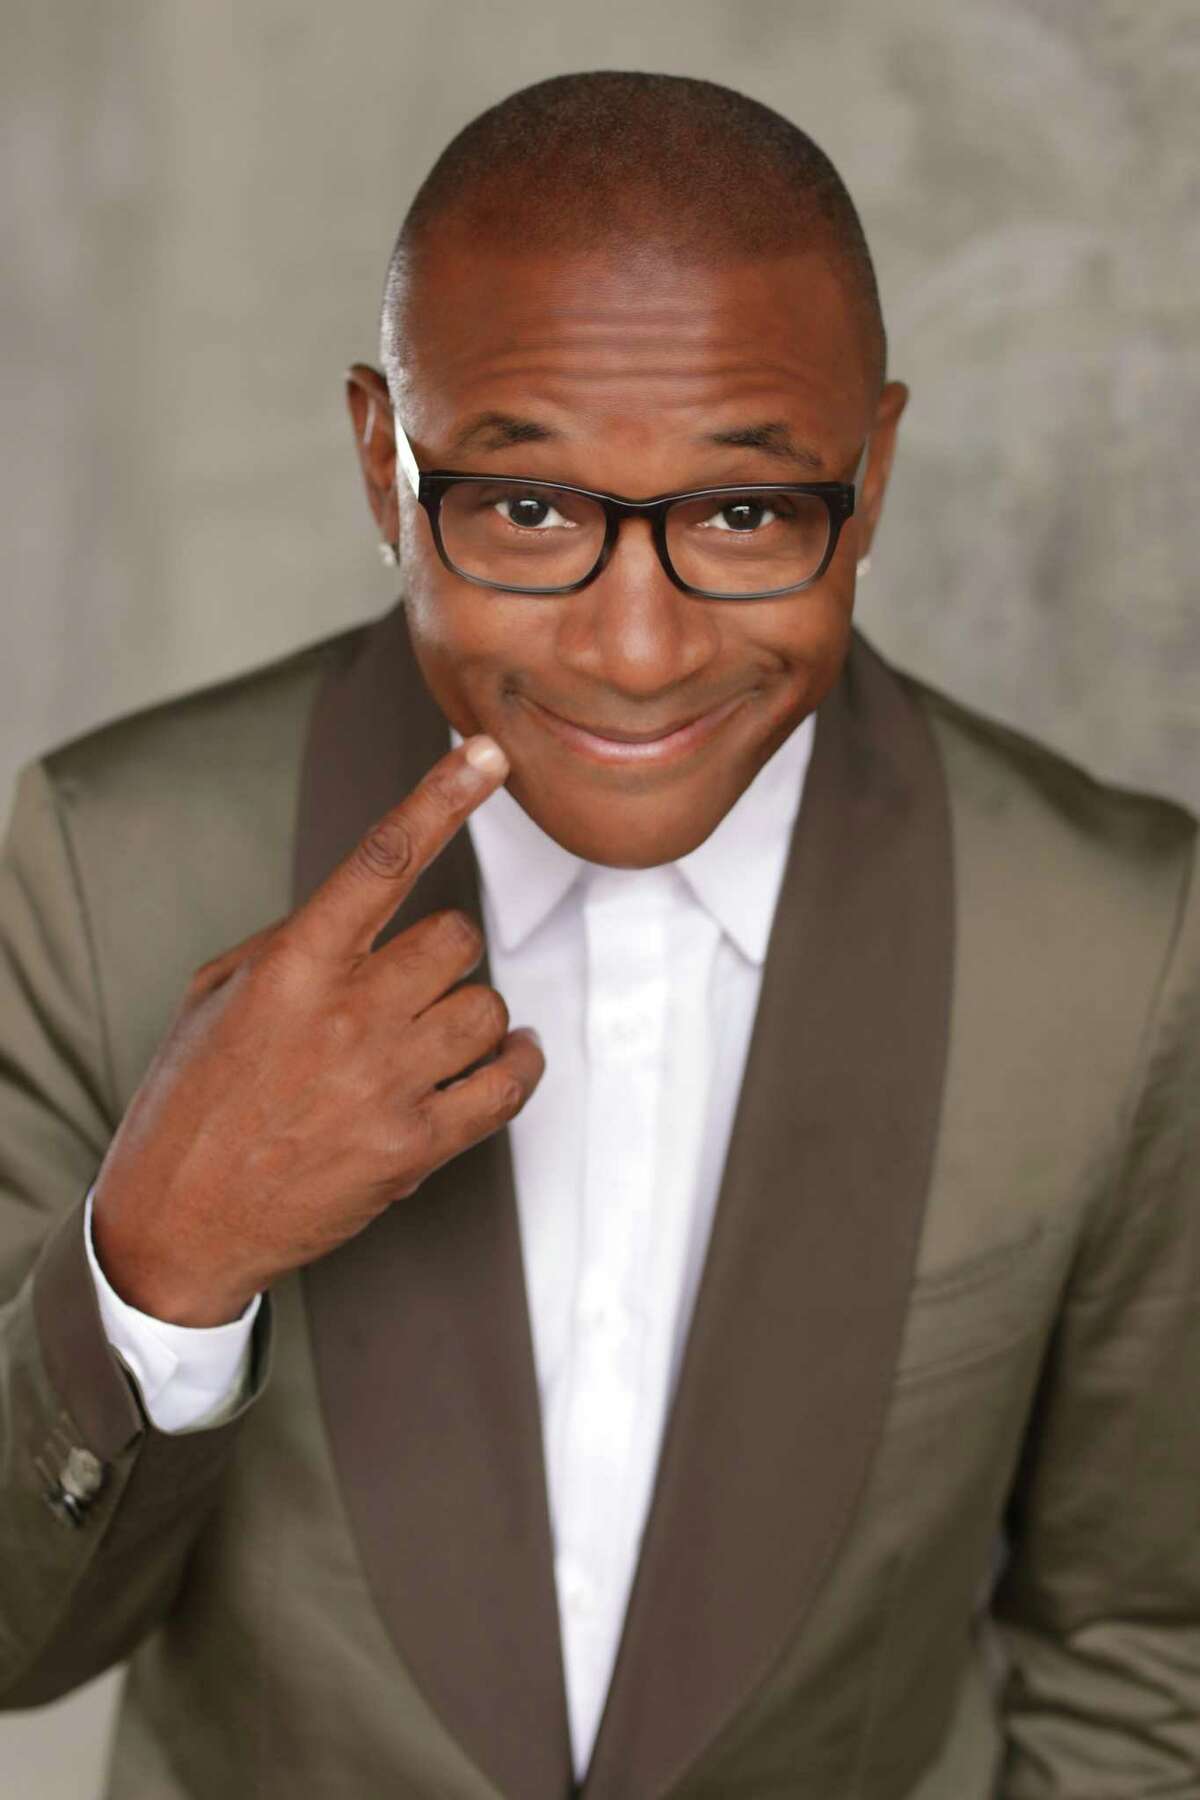 Comedian Tommy Davidson will perform at The Stress Factory in Bridgeport, Feb. 7 and 8. There will be two shows each night.